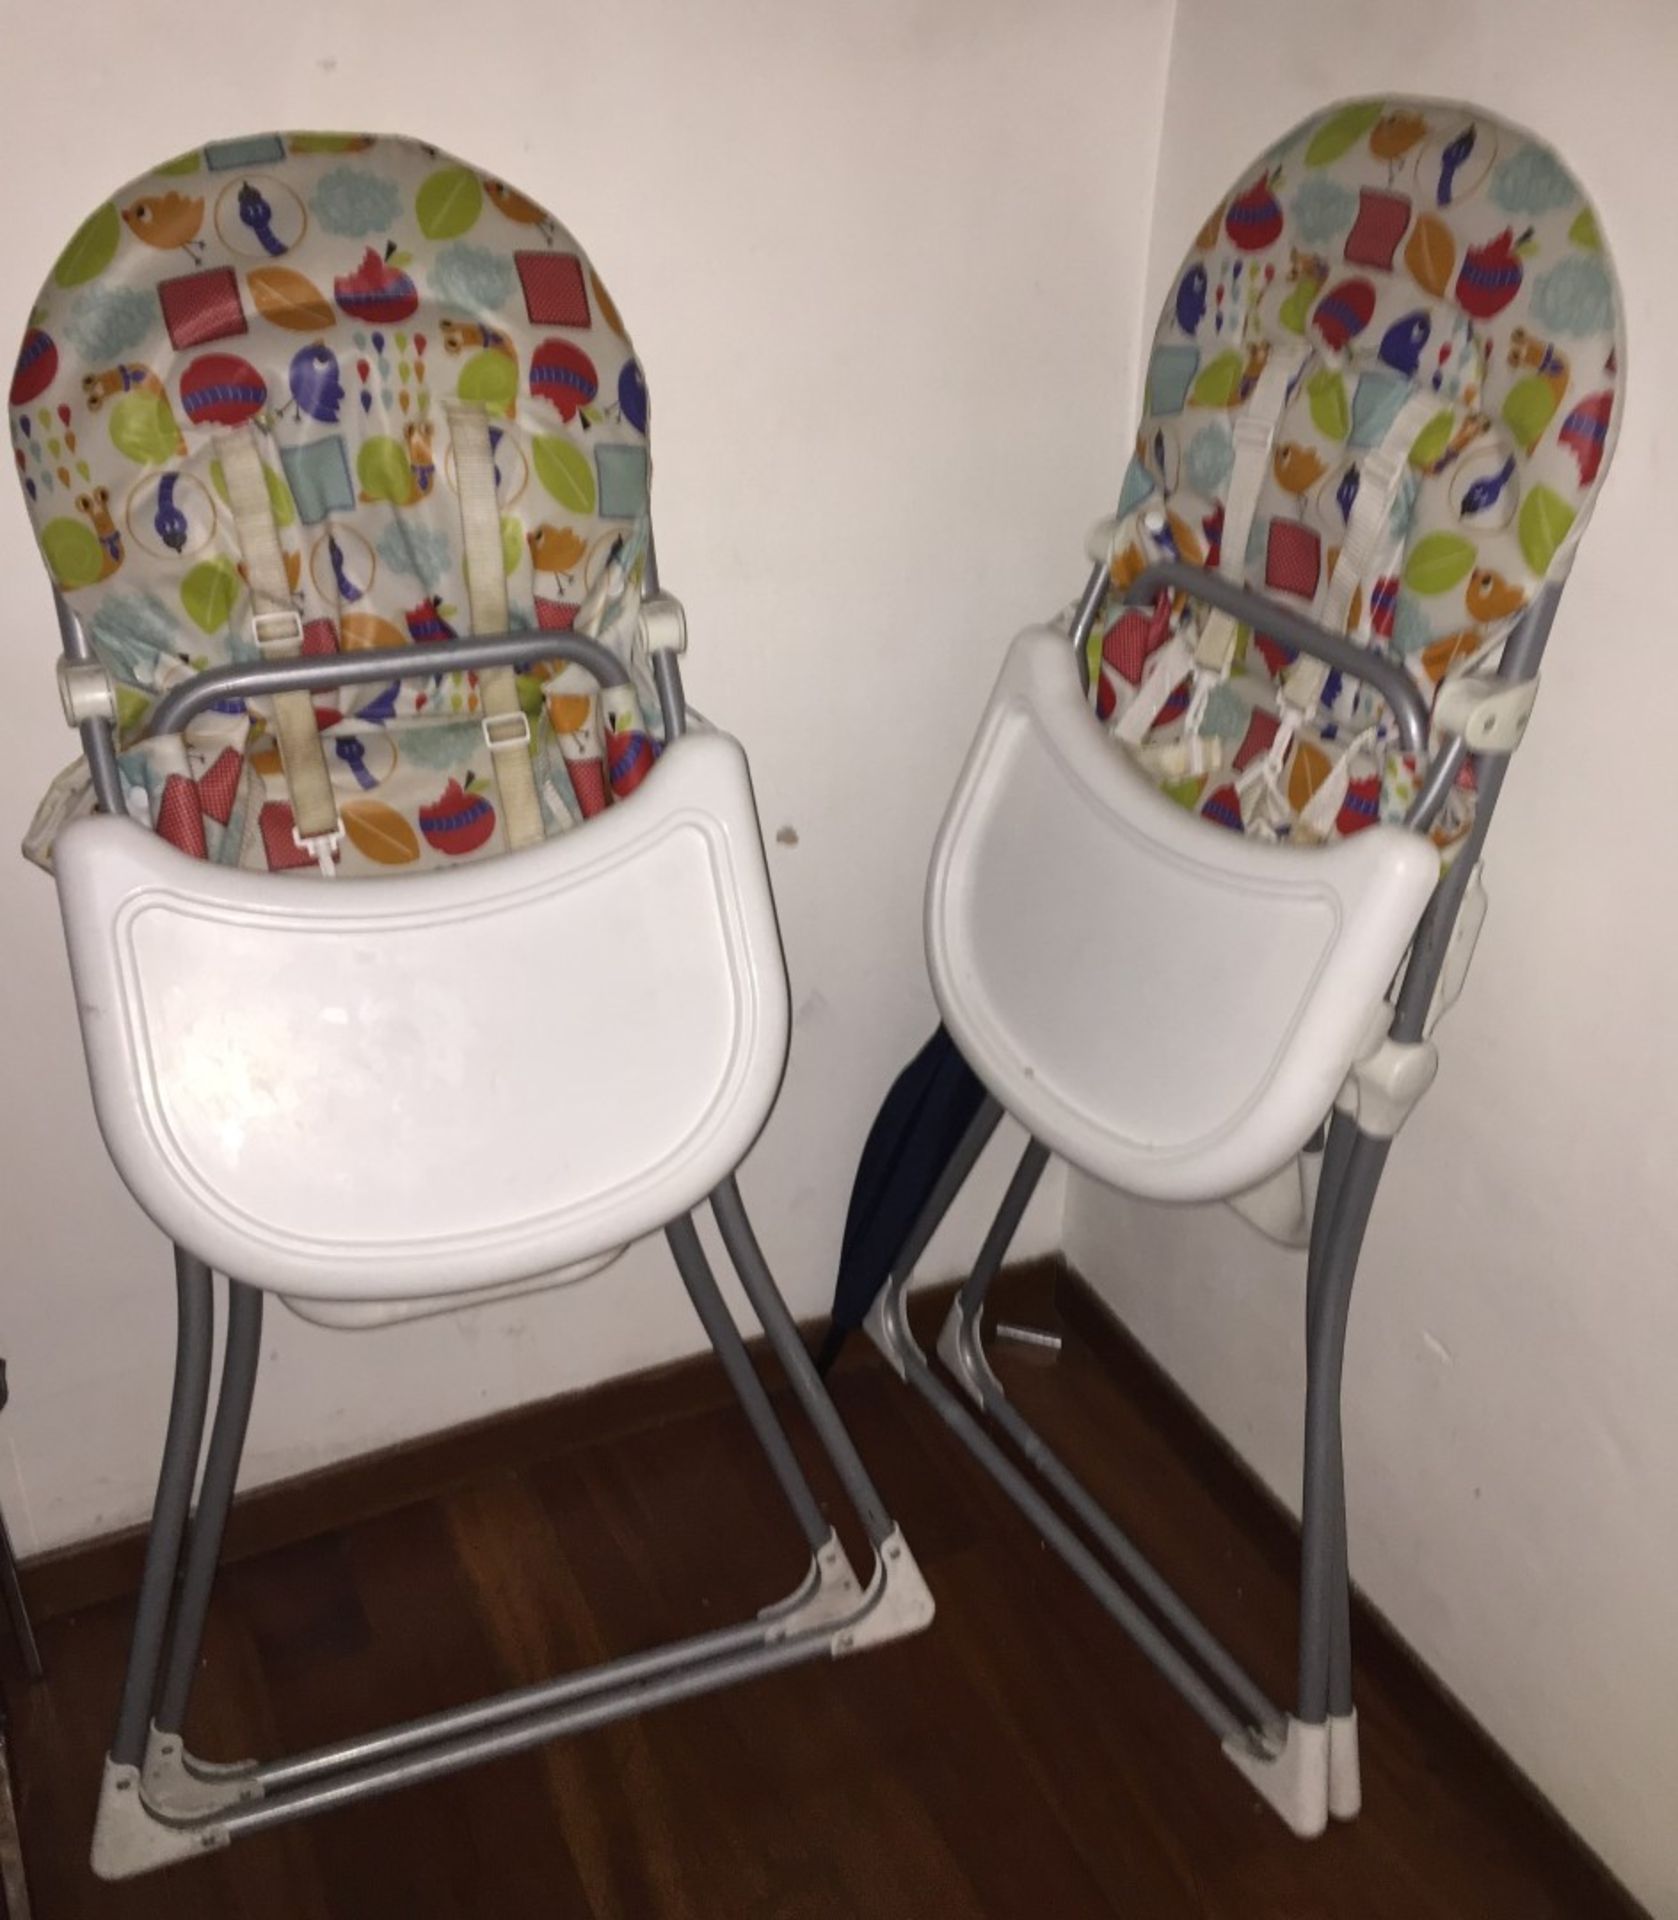 2 x Childrens High Chairs - Foldable High Chairs With Eating Trays - CL188 - Ref GF7 - Location: